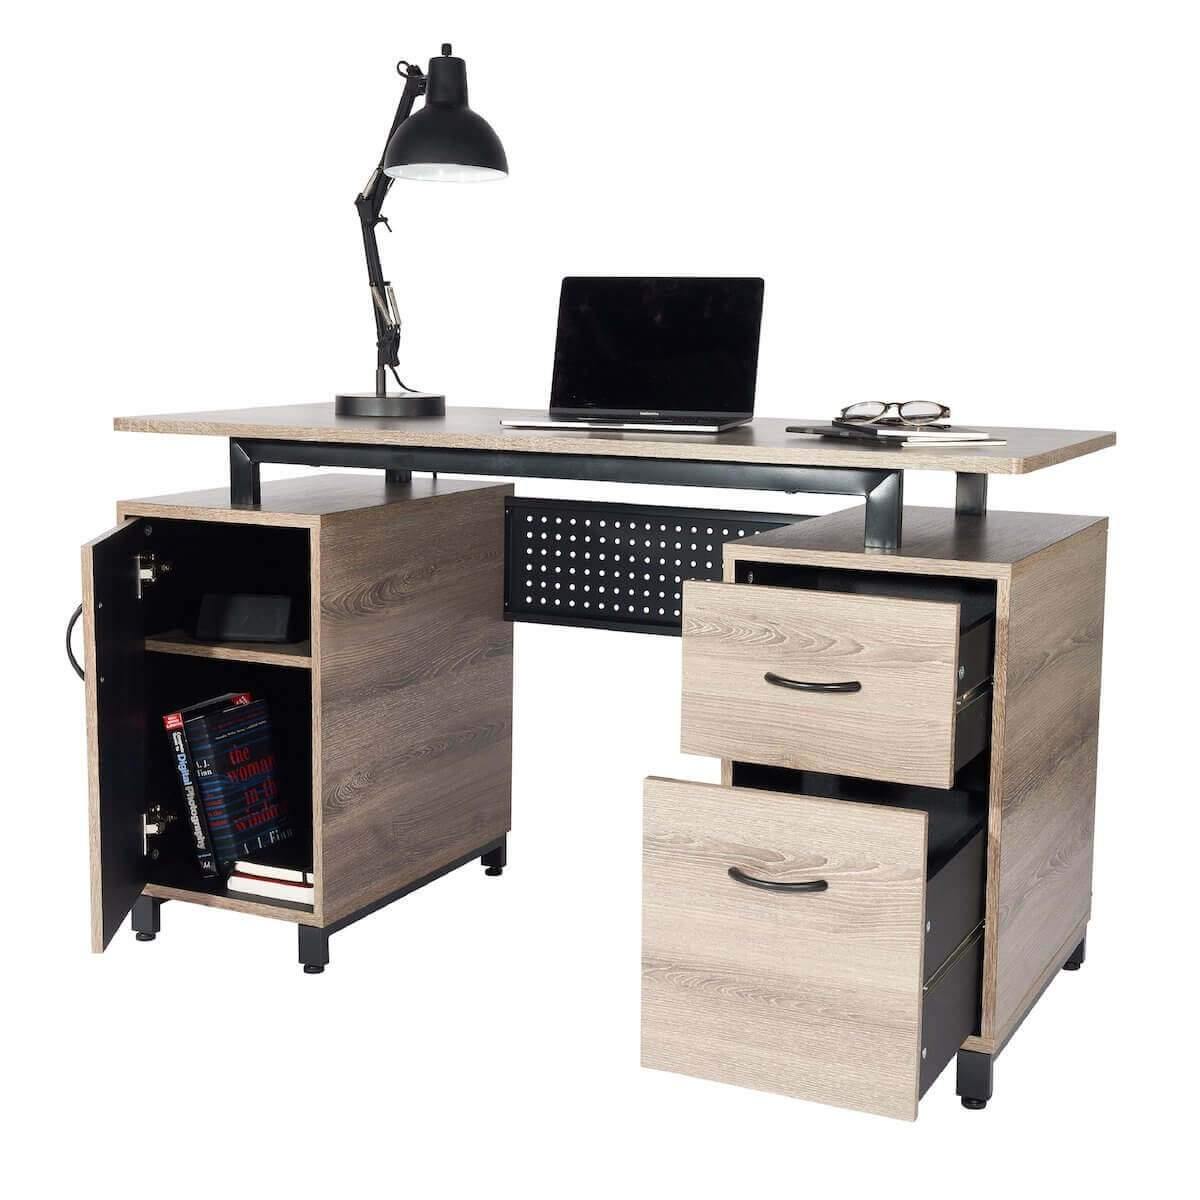 Techni Mobili Gray Computer Desk with Storage RTA-0054-GRY Open Cabinet and Drawers with Computer